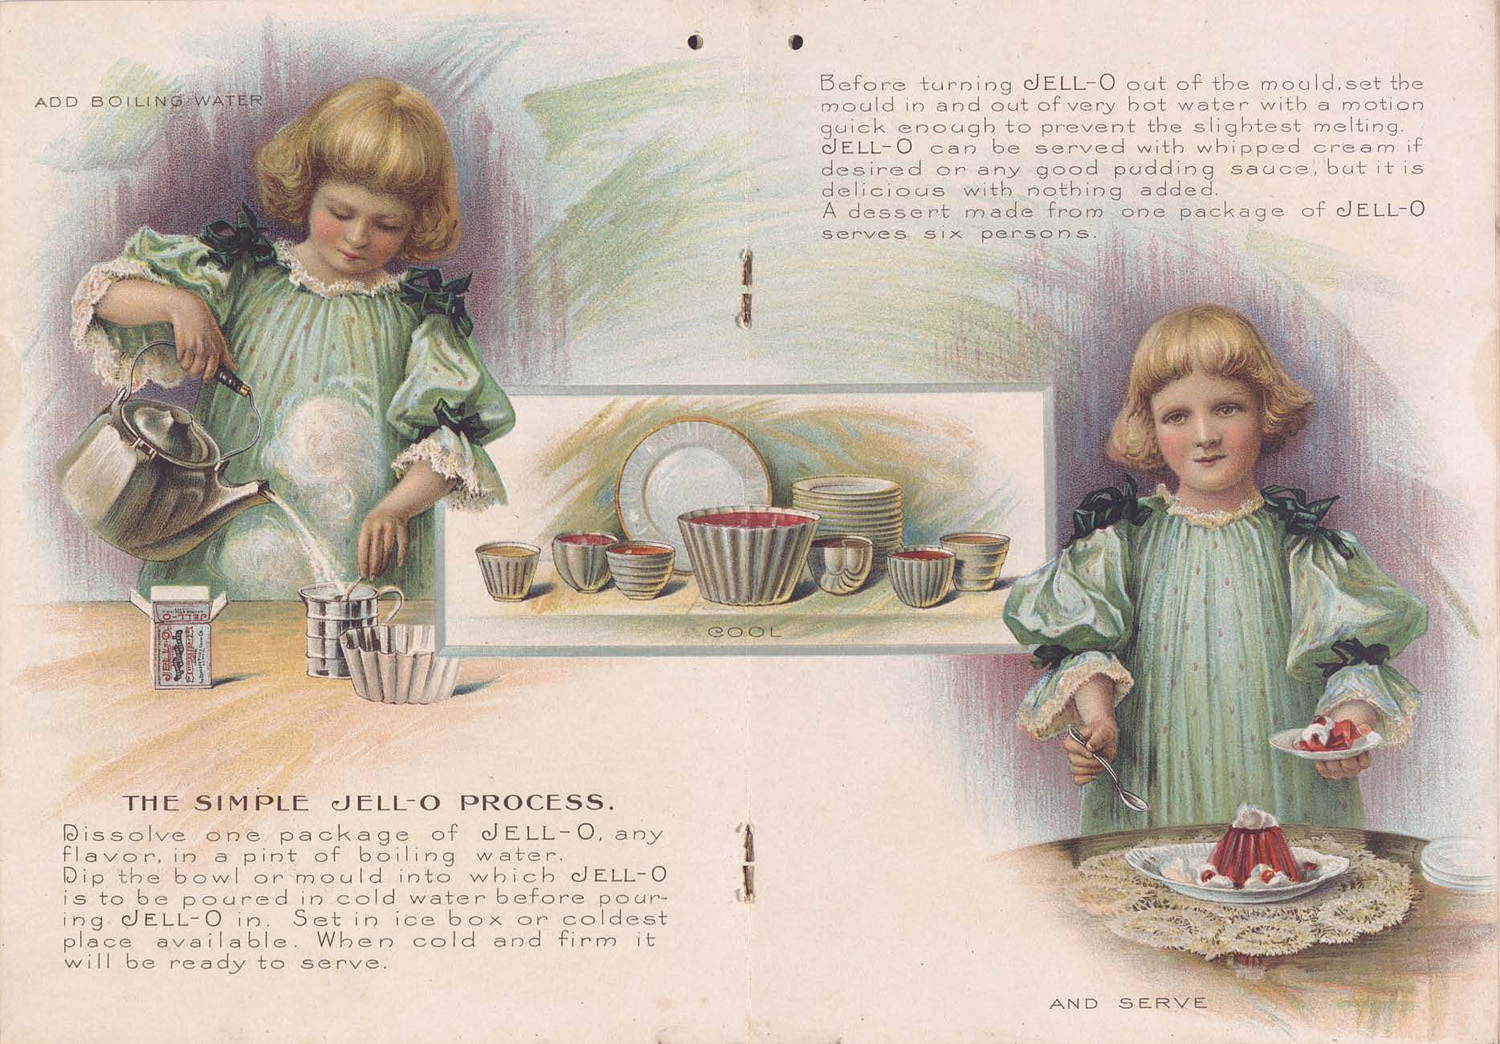 Miss Jell-O, a girl in a puffy dress, making a red jell-o mold